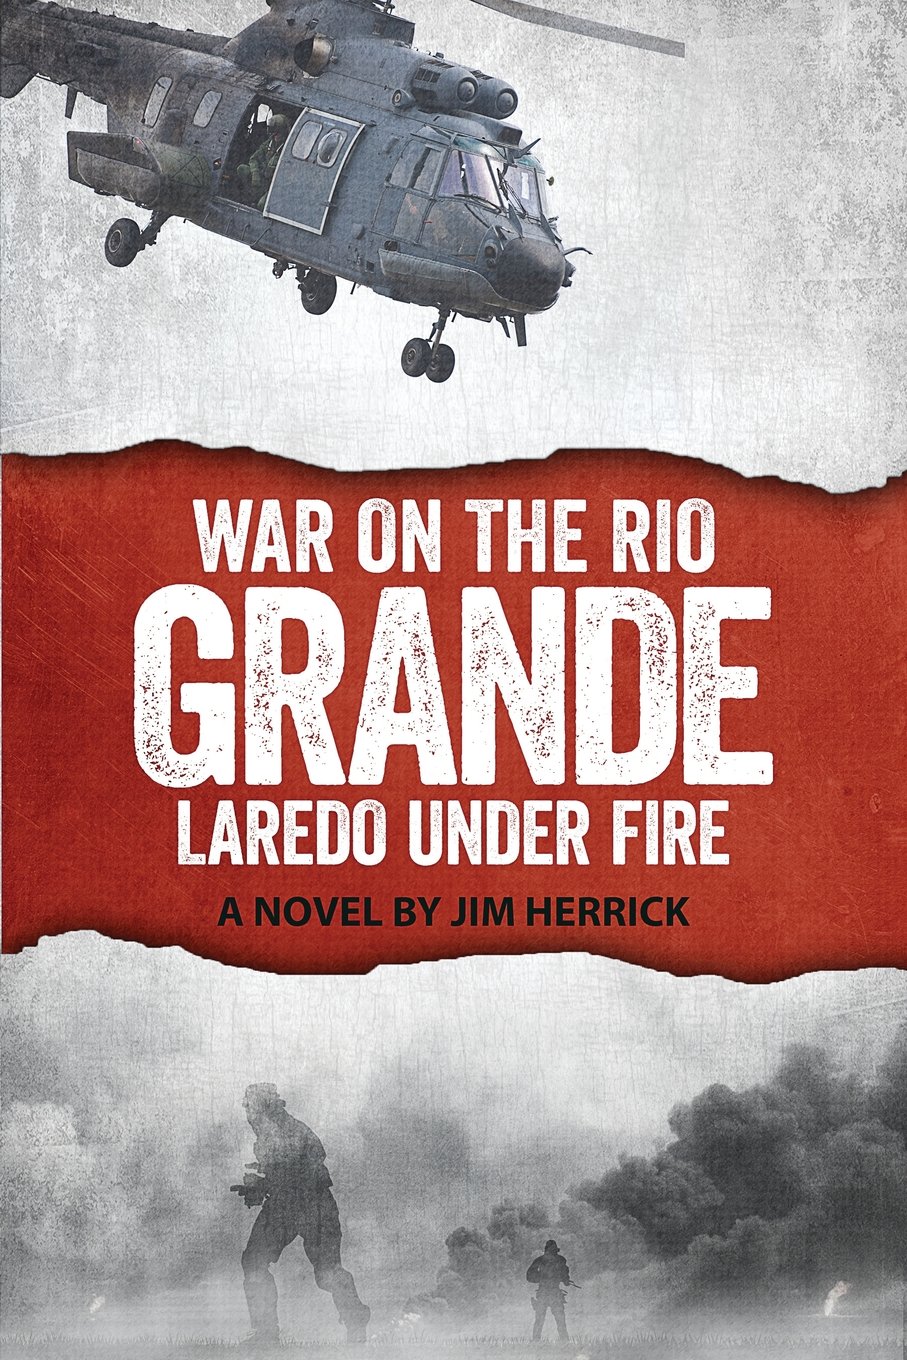 Introducing 'War on the Rio Grande: Laredo Under Fire' by Jim Herrick: A Gripping Tale of Border Security, Love, and Revenge